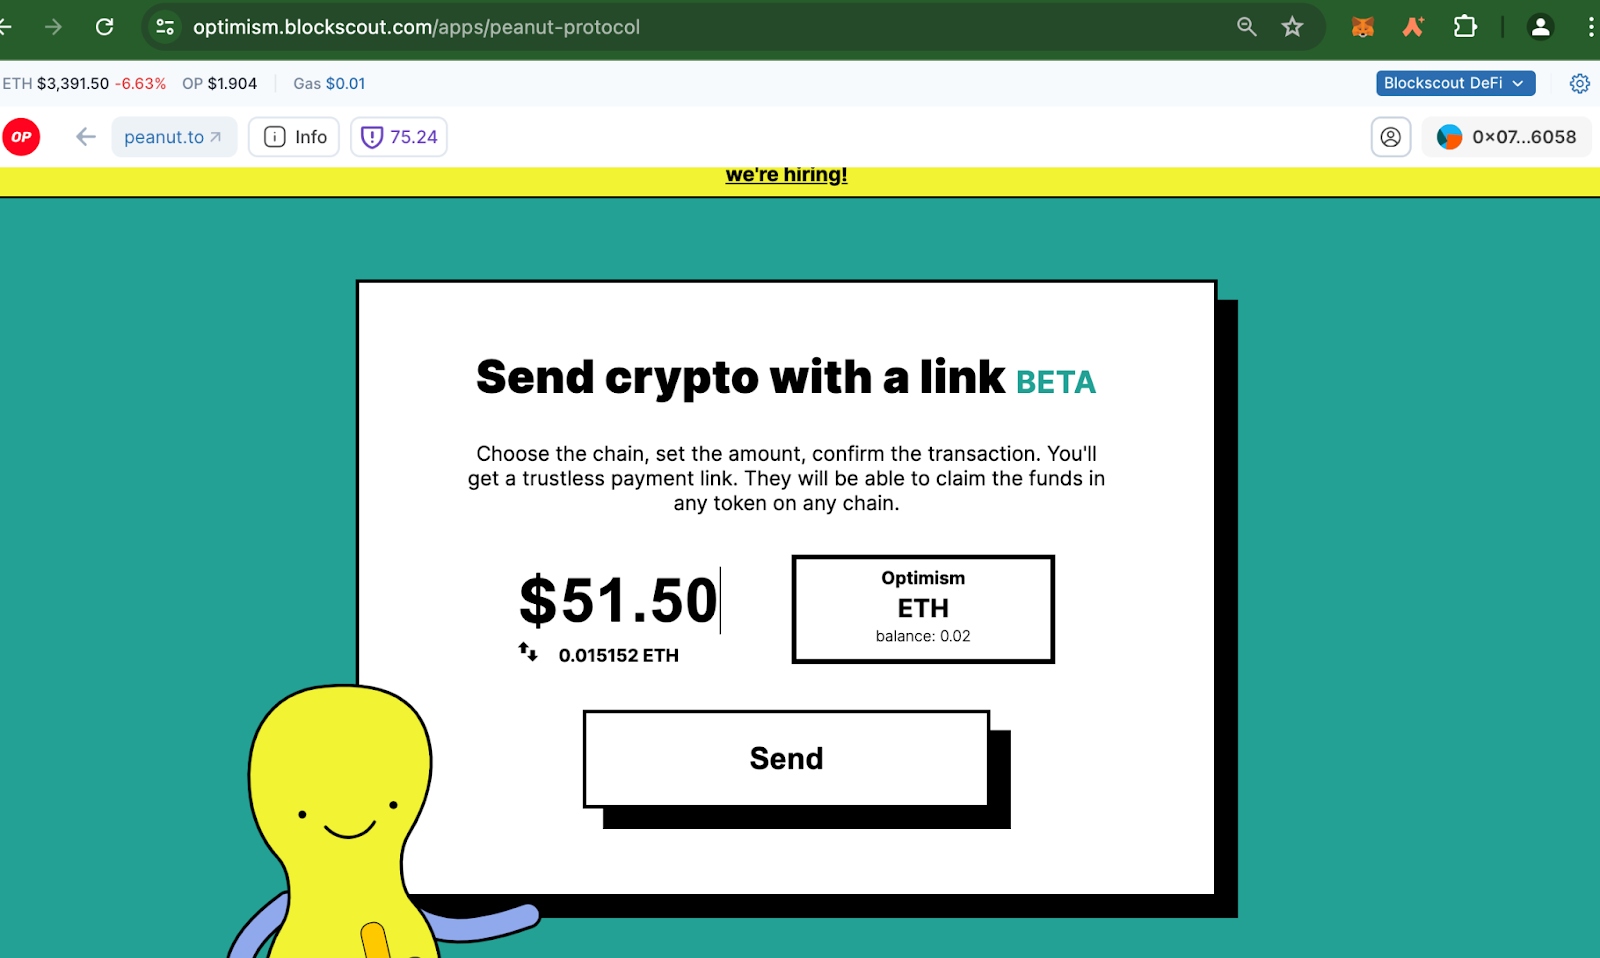 Send crypto with a link on Blockscout